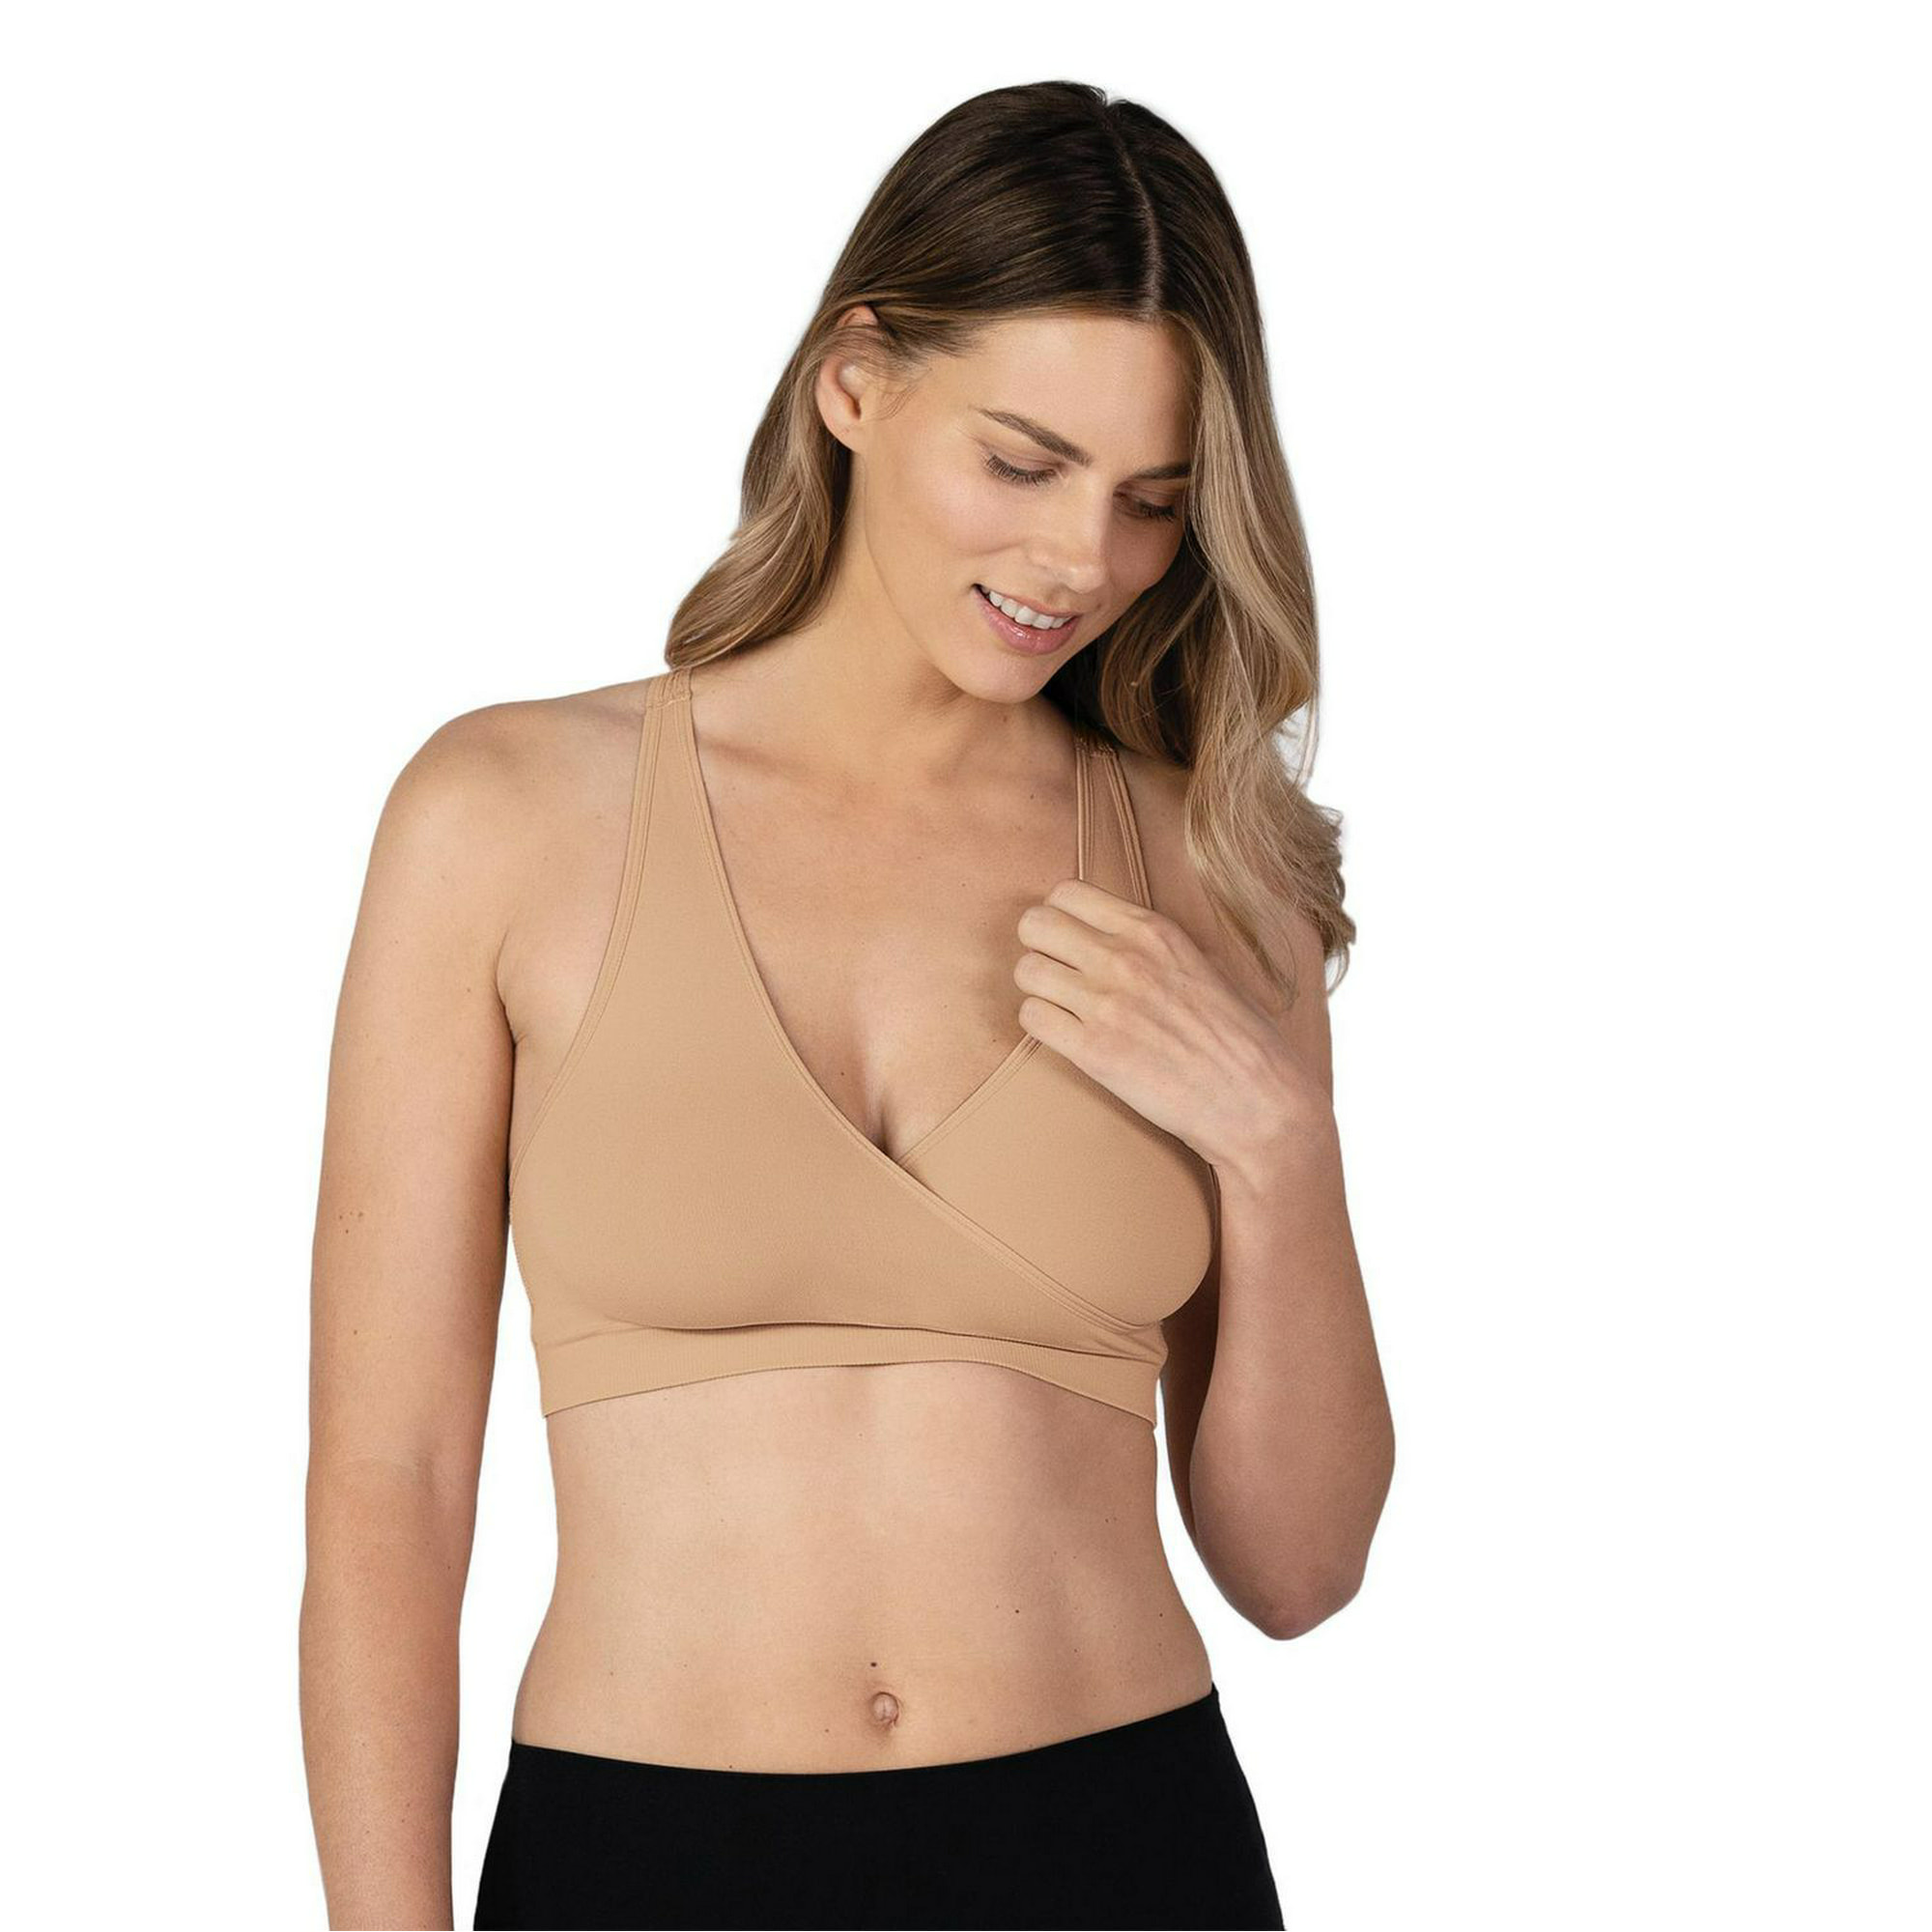 Seamless Nursing Bra For Pregnant Women, Daily Wear And Sleeping